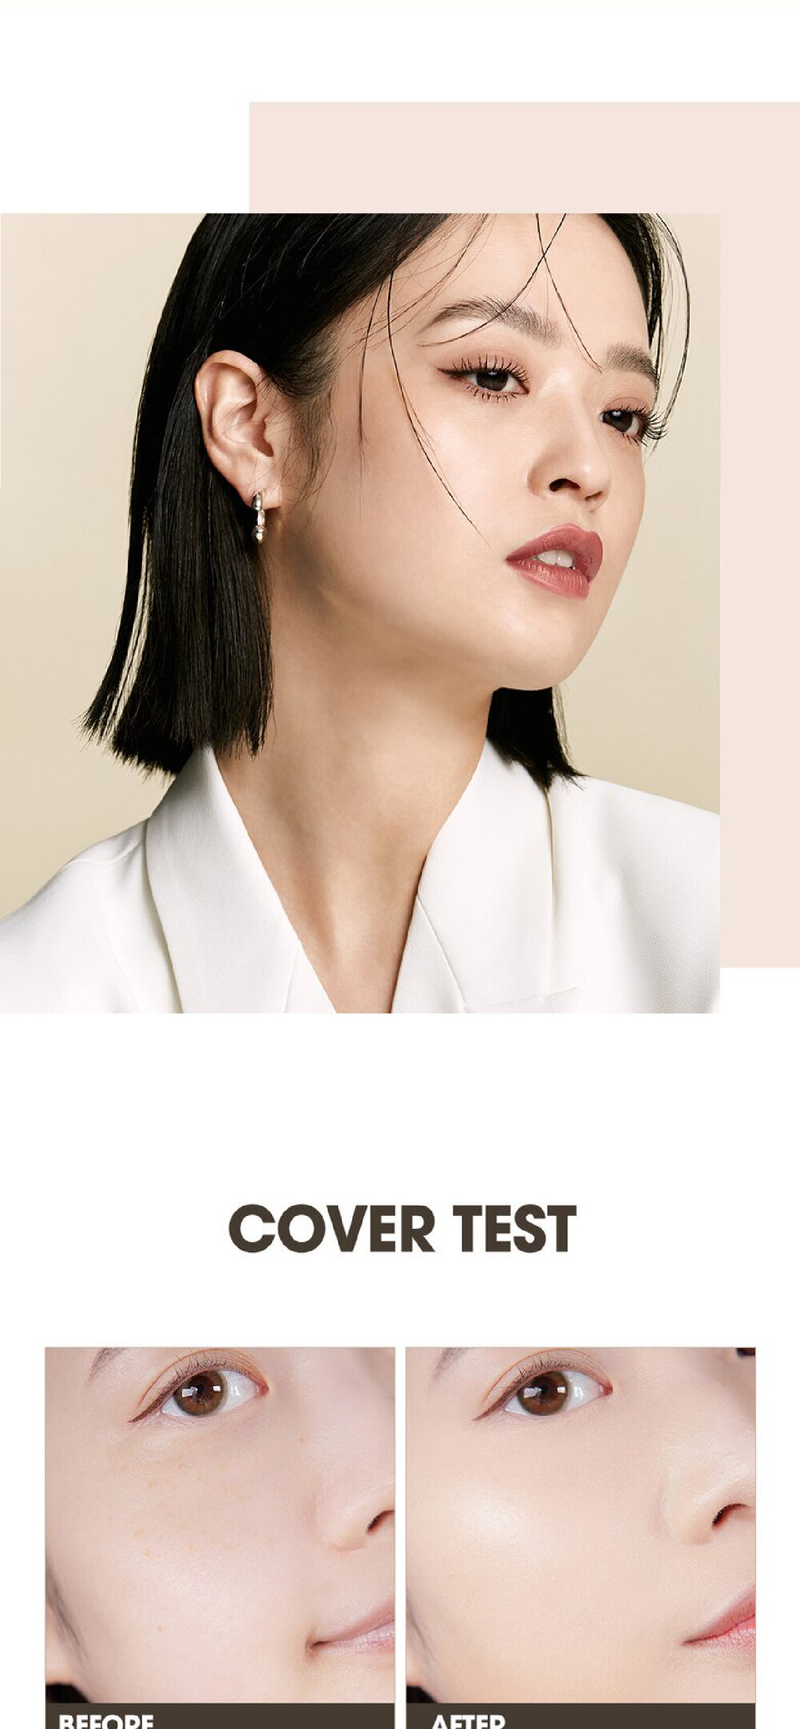 the SAEM Cover Perfection Tip Concealer